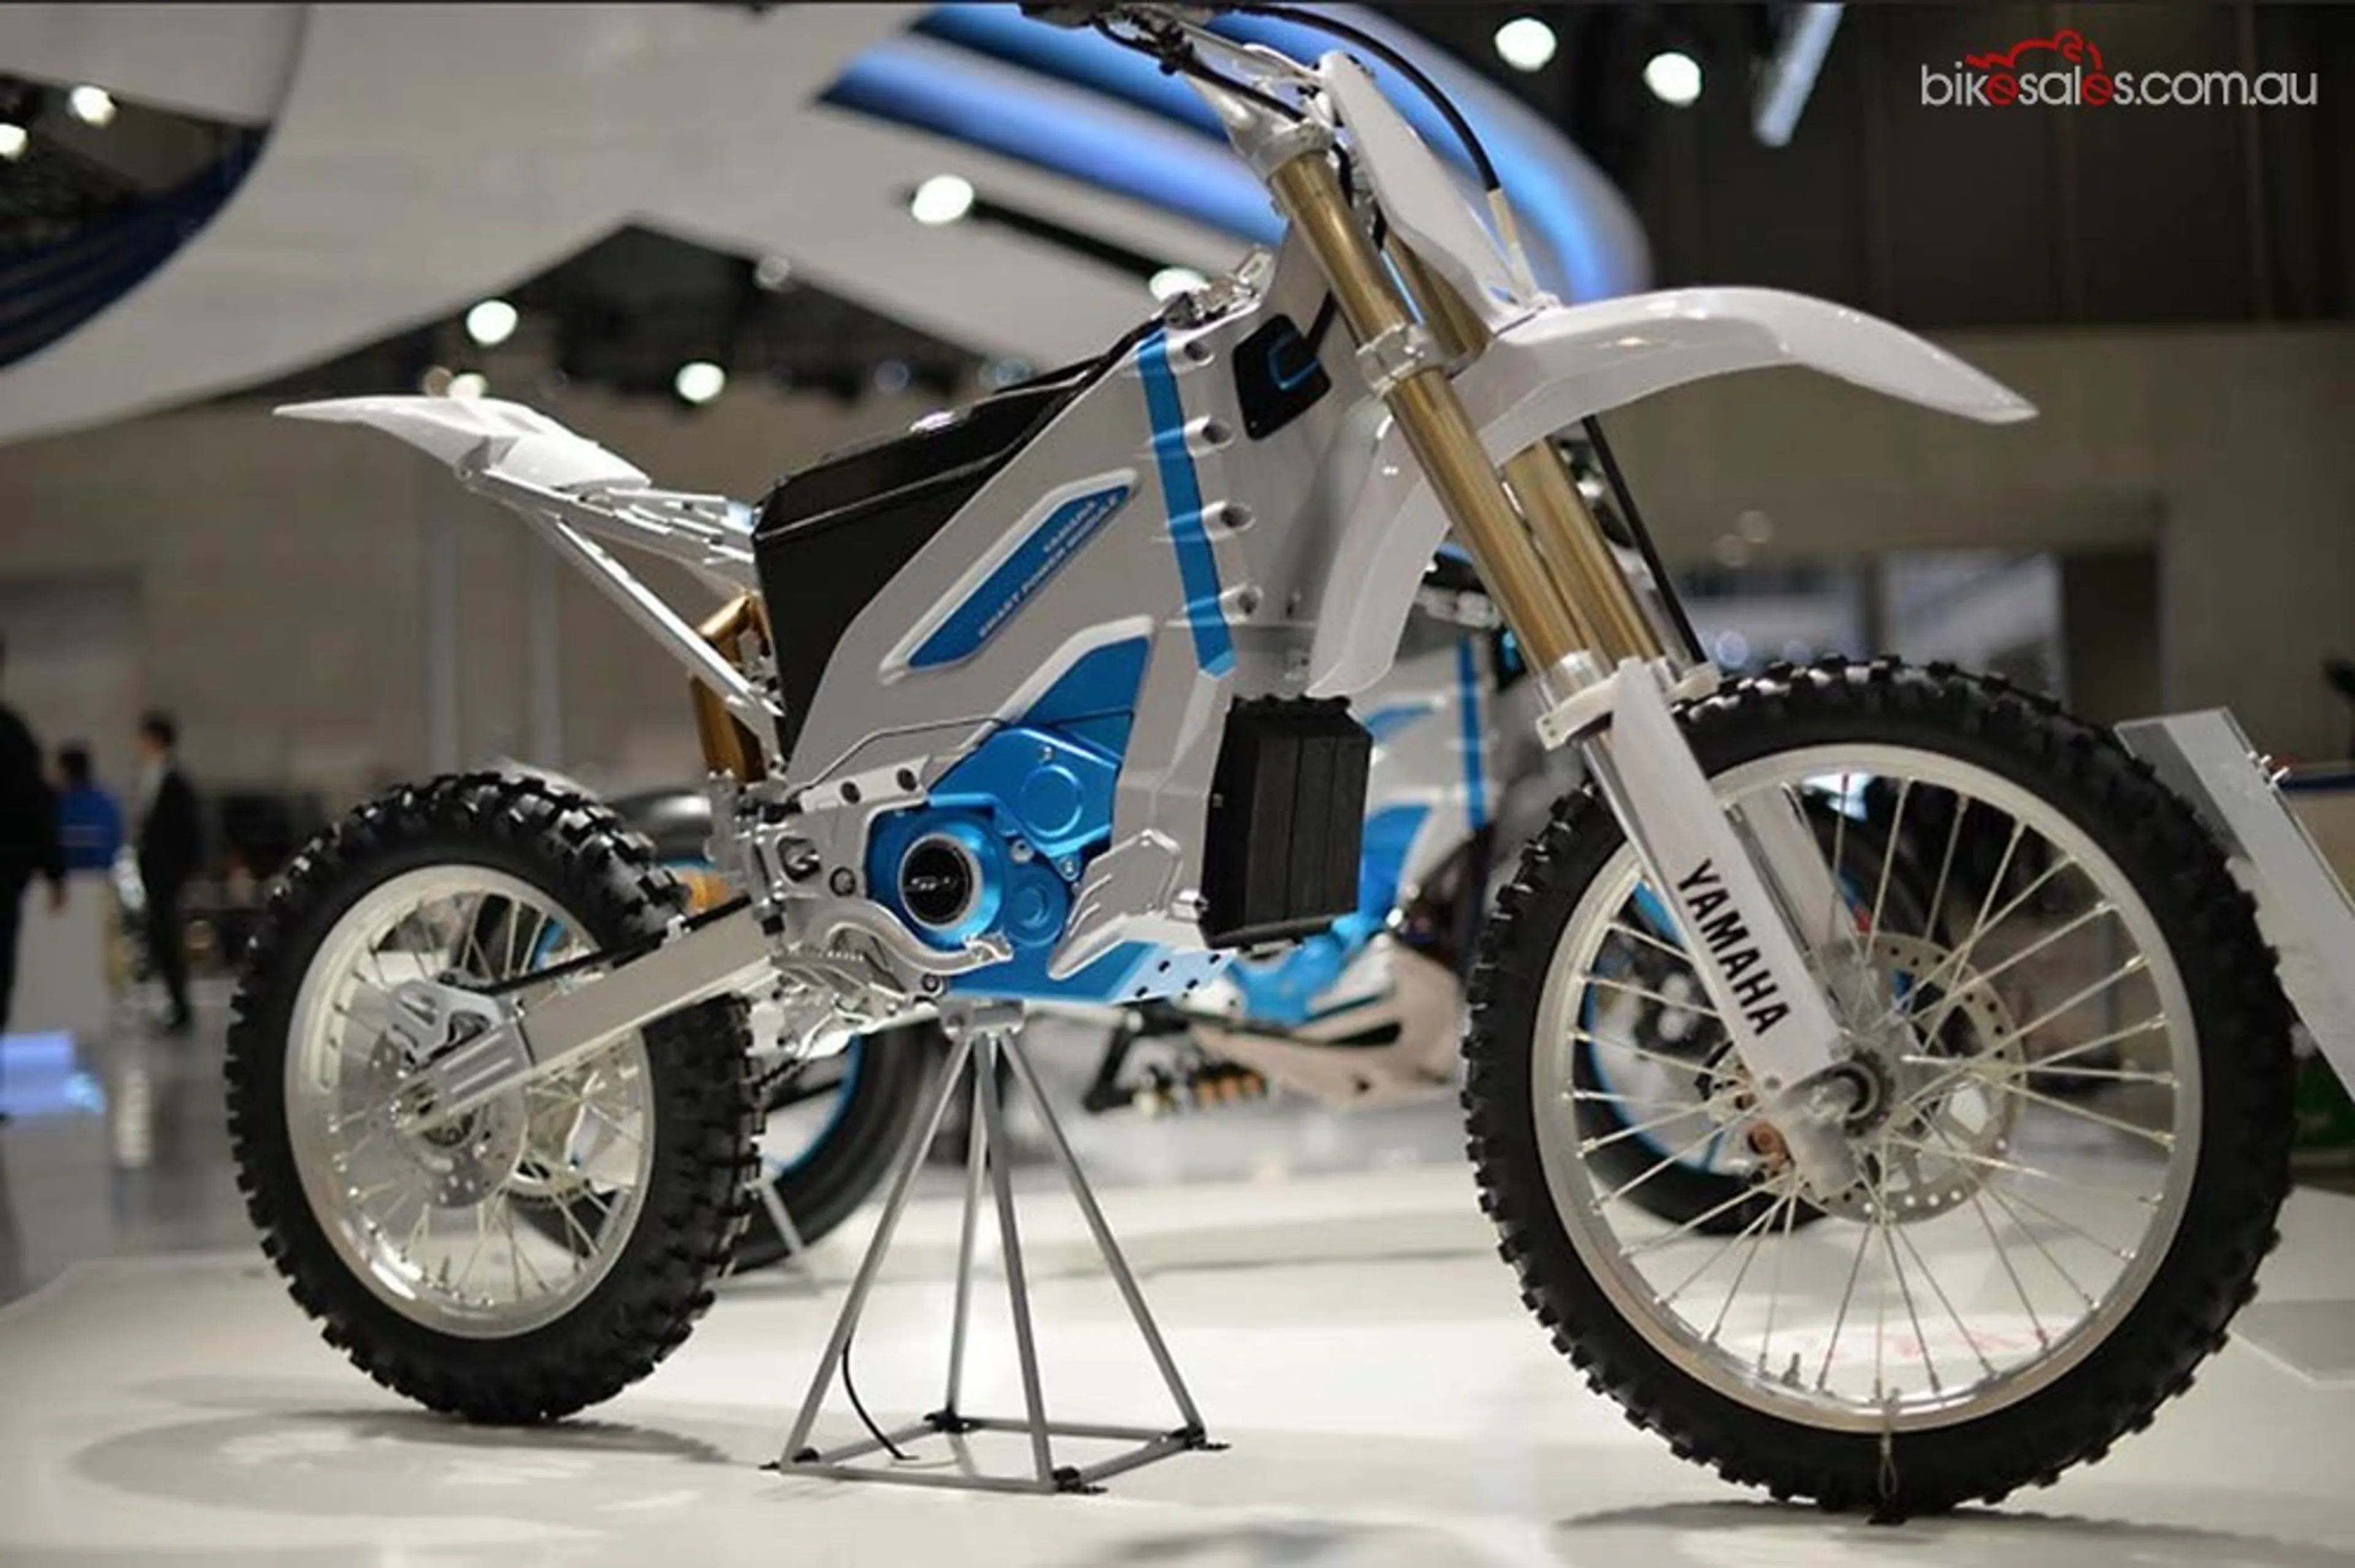 The Future of Motorcycling: Electric Motorcycles and Sustainable Transportation